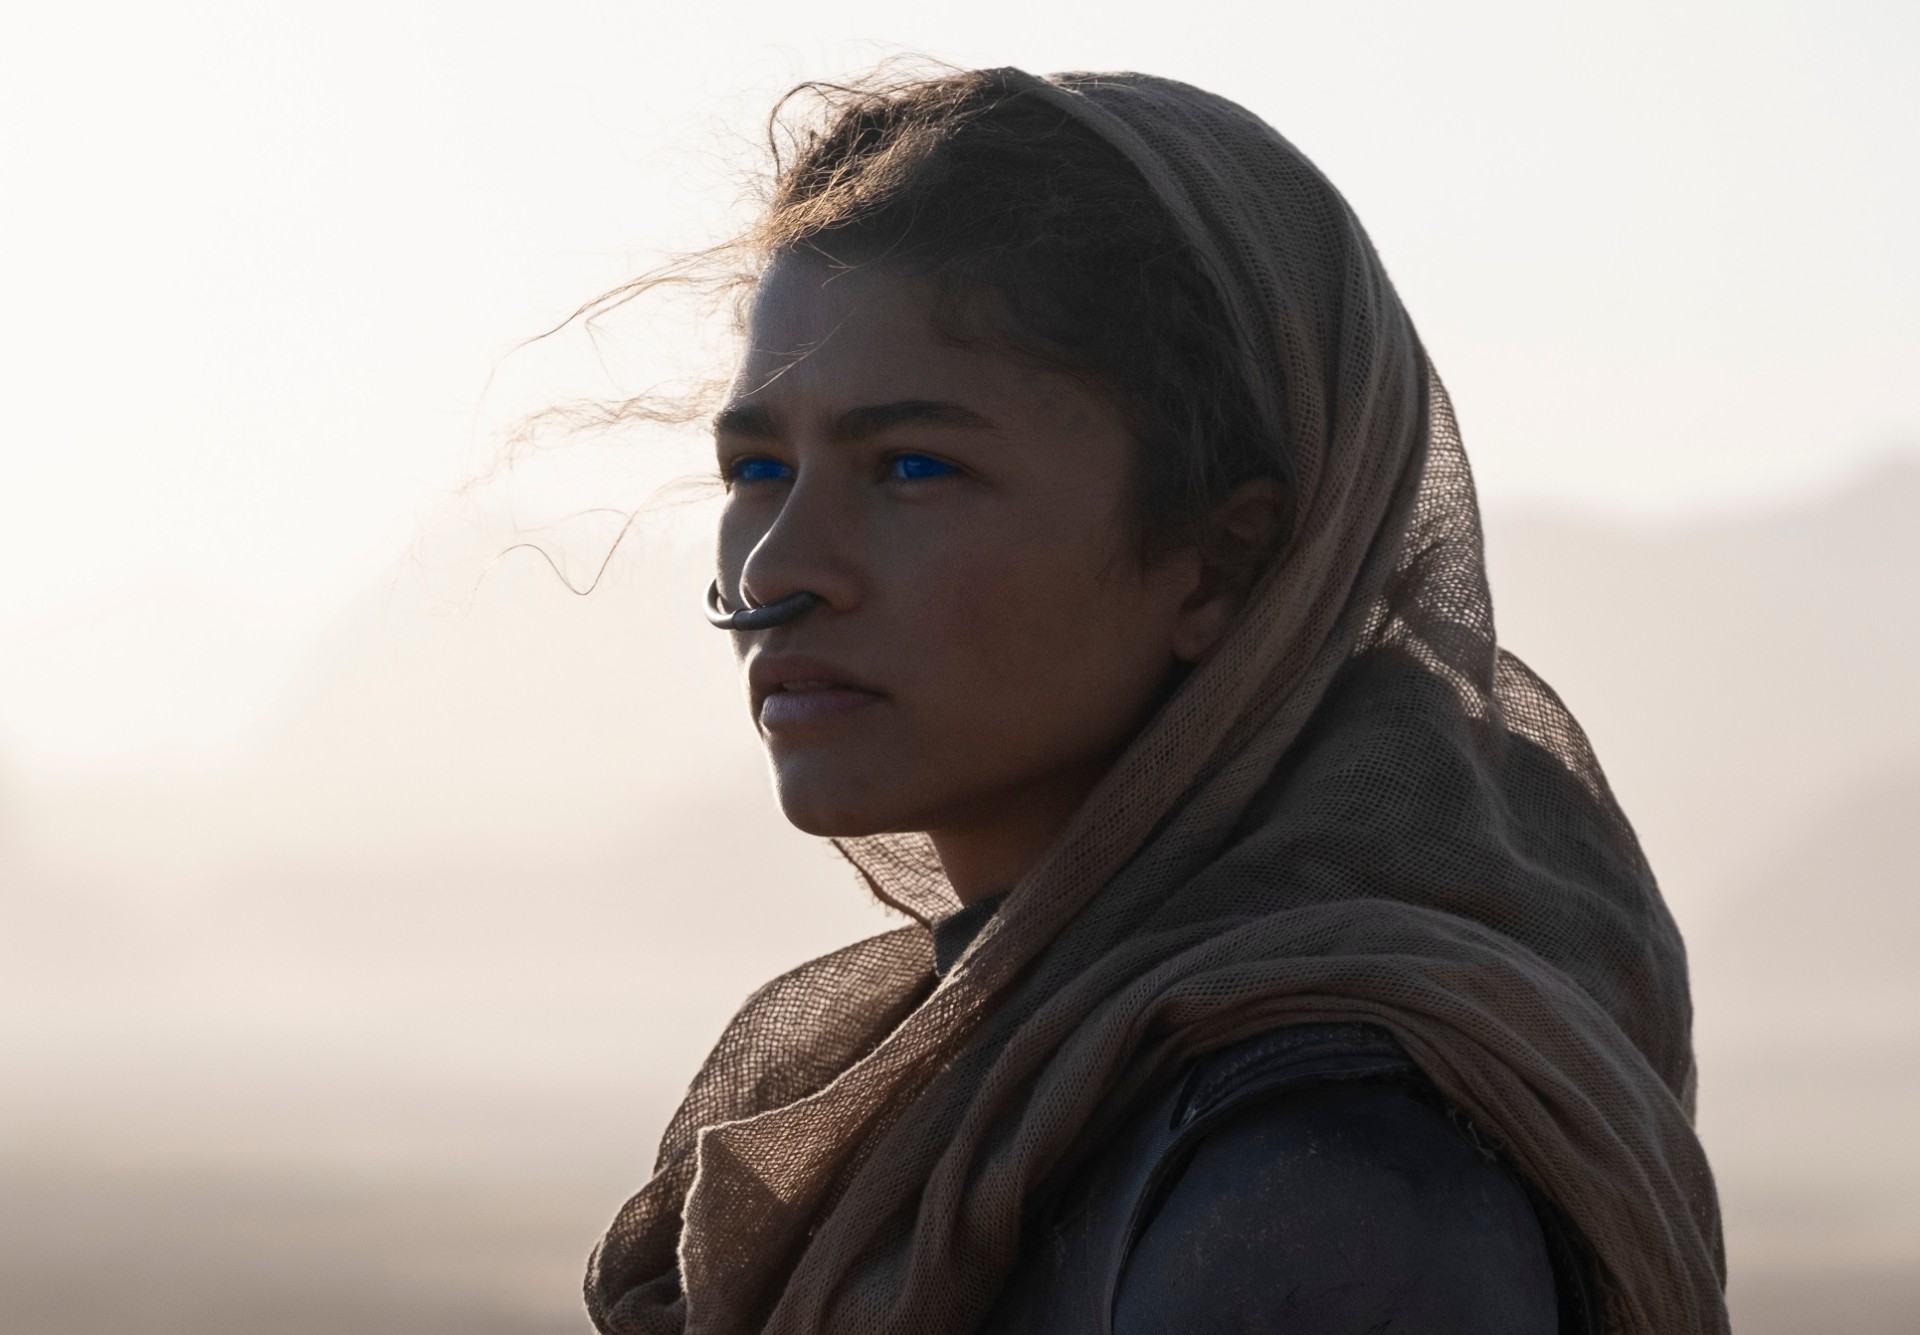 zendaya as her character chani with blue eyes in the dune movie